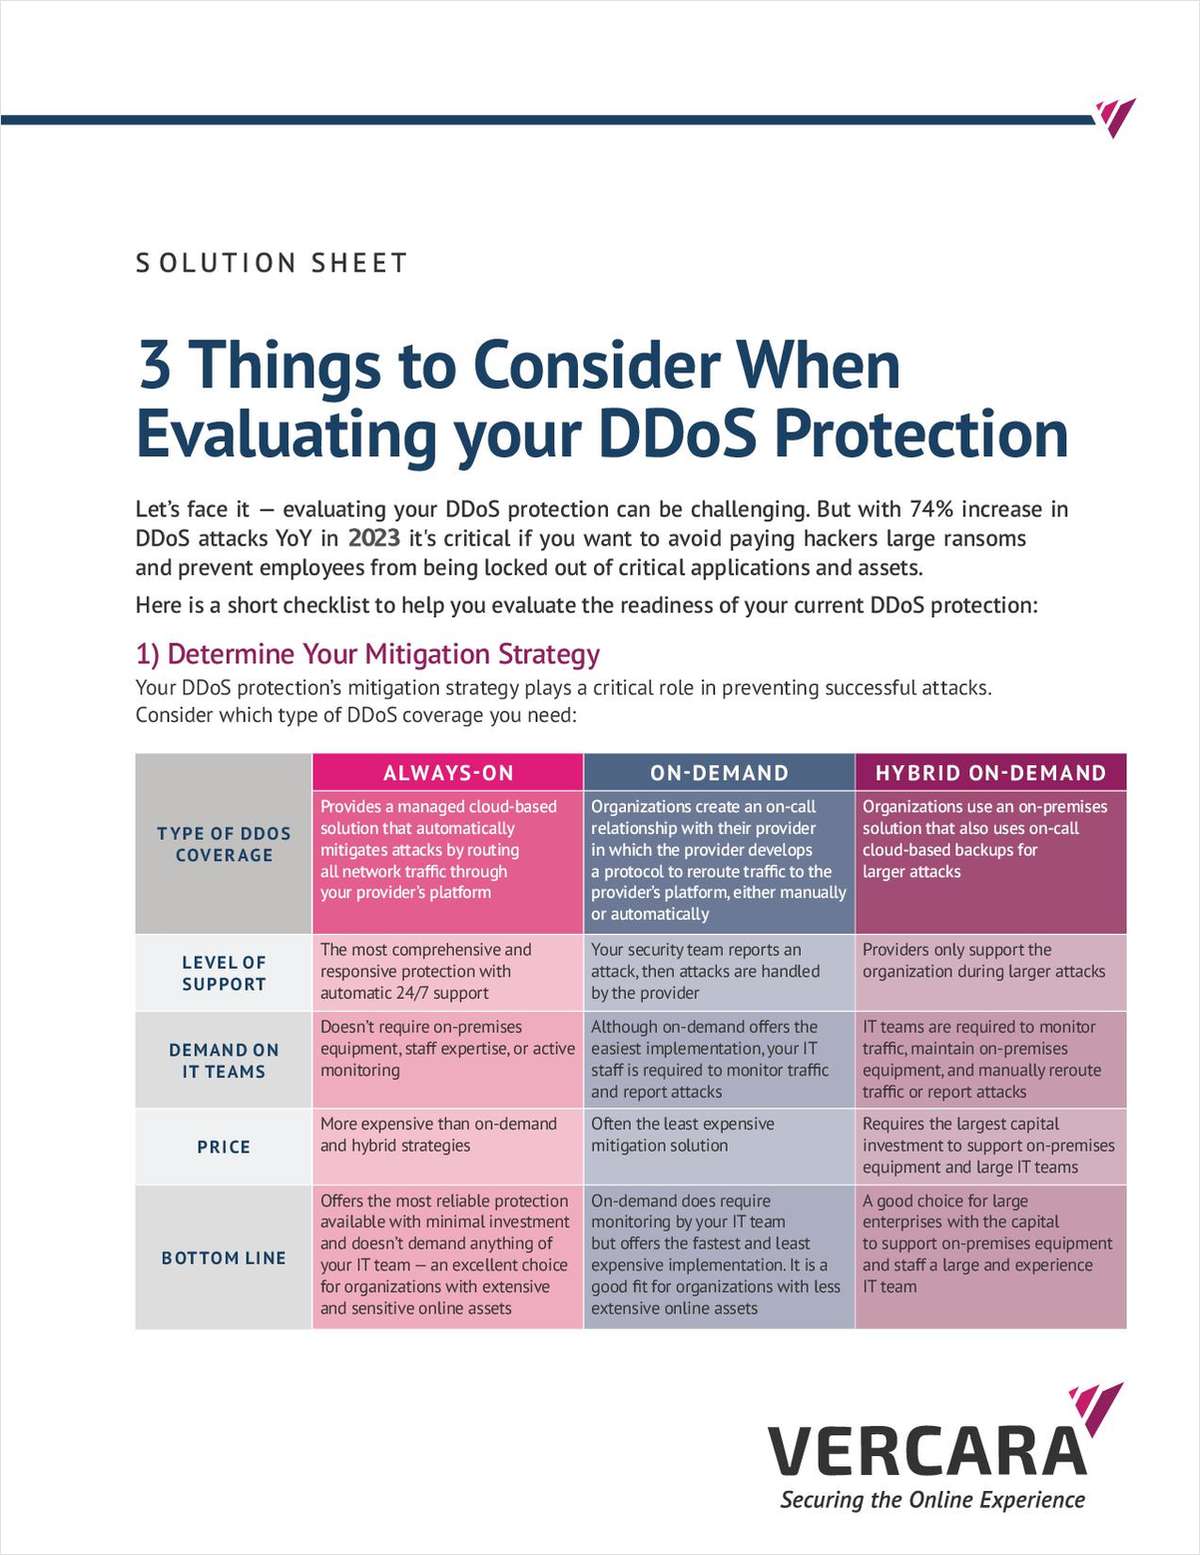 3 Things to Consider When Evaluating DDoS Protection